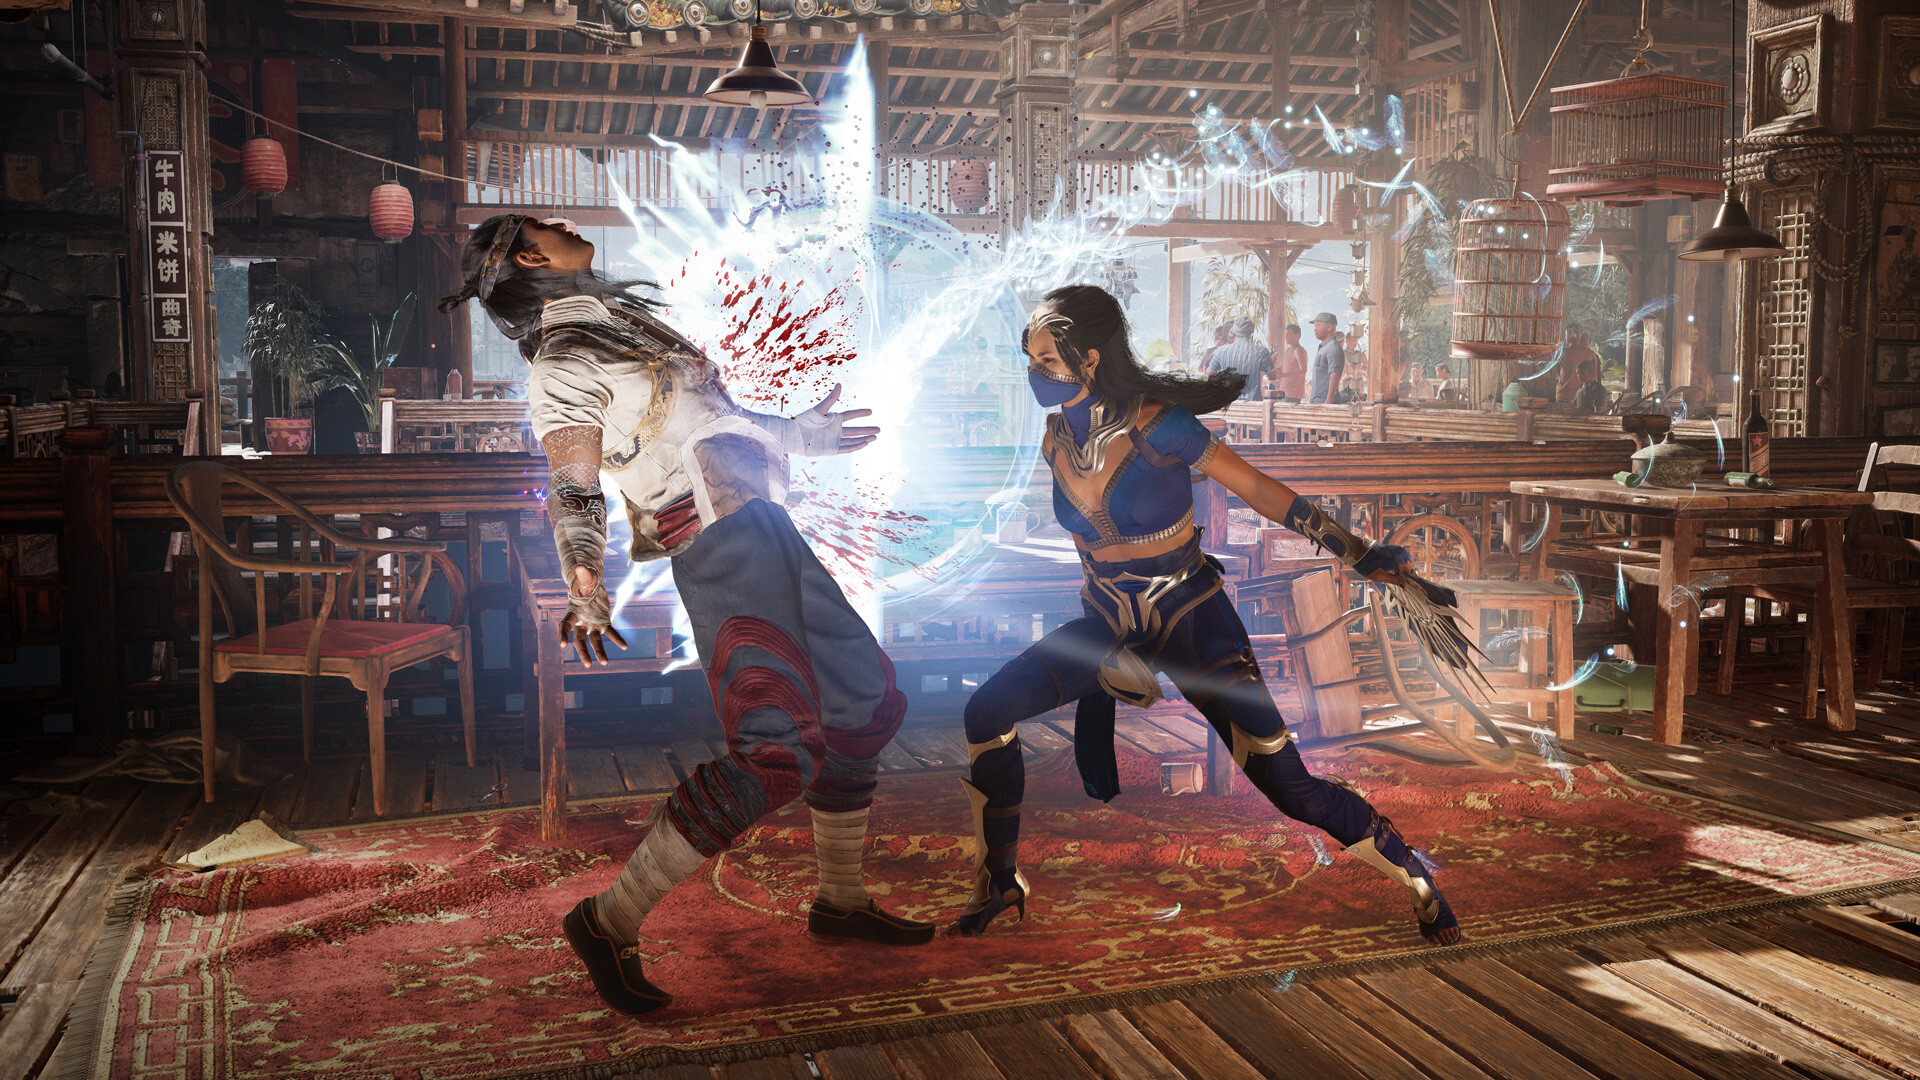 Mortal Kombat 1 PC Requirements Are Out Now On Steam